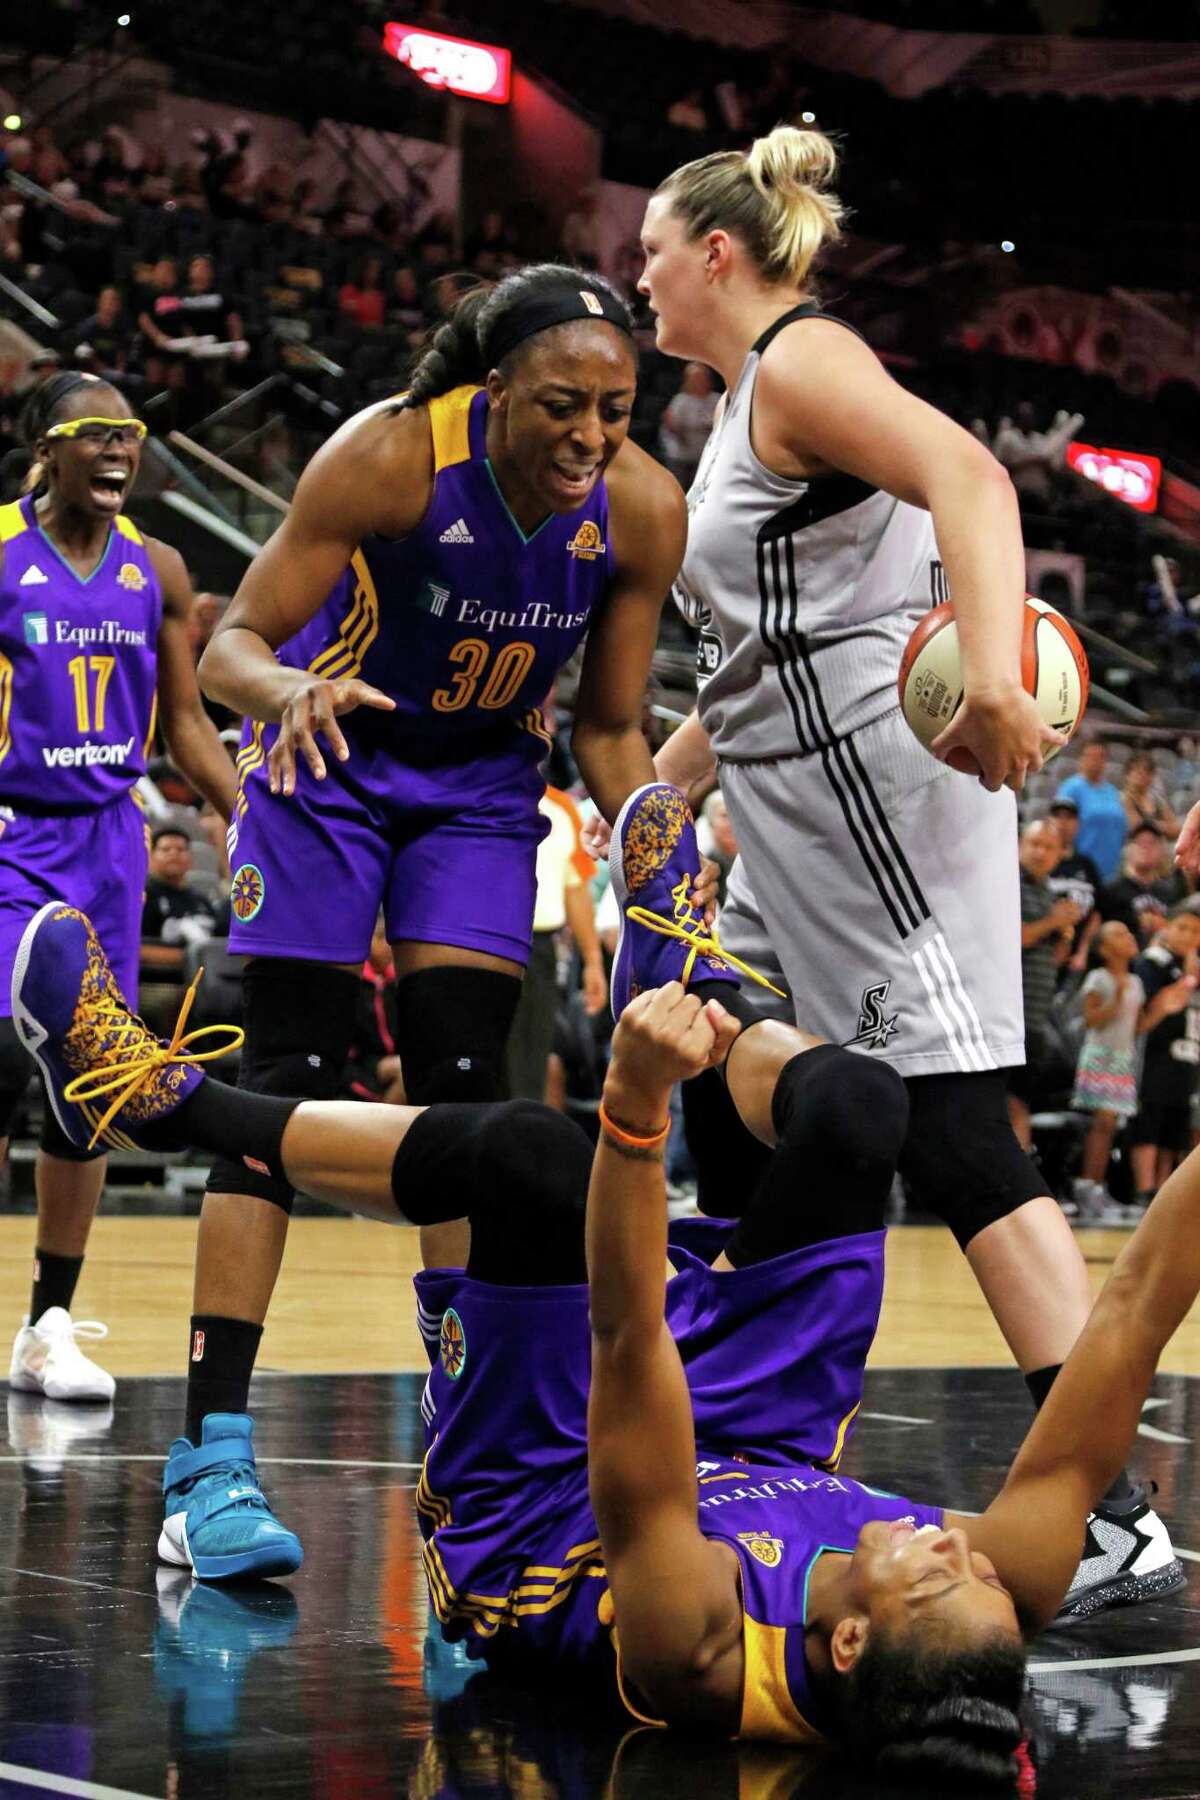 Los Angeles Sparks Candace Parker celebrates with Los Angeles Sparks Nneka Ogwumike after she drew the charge from San Antonio Stars?• Jayne Appel-Marinelli Saturday, June 4, 2016 at AT&T Center.